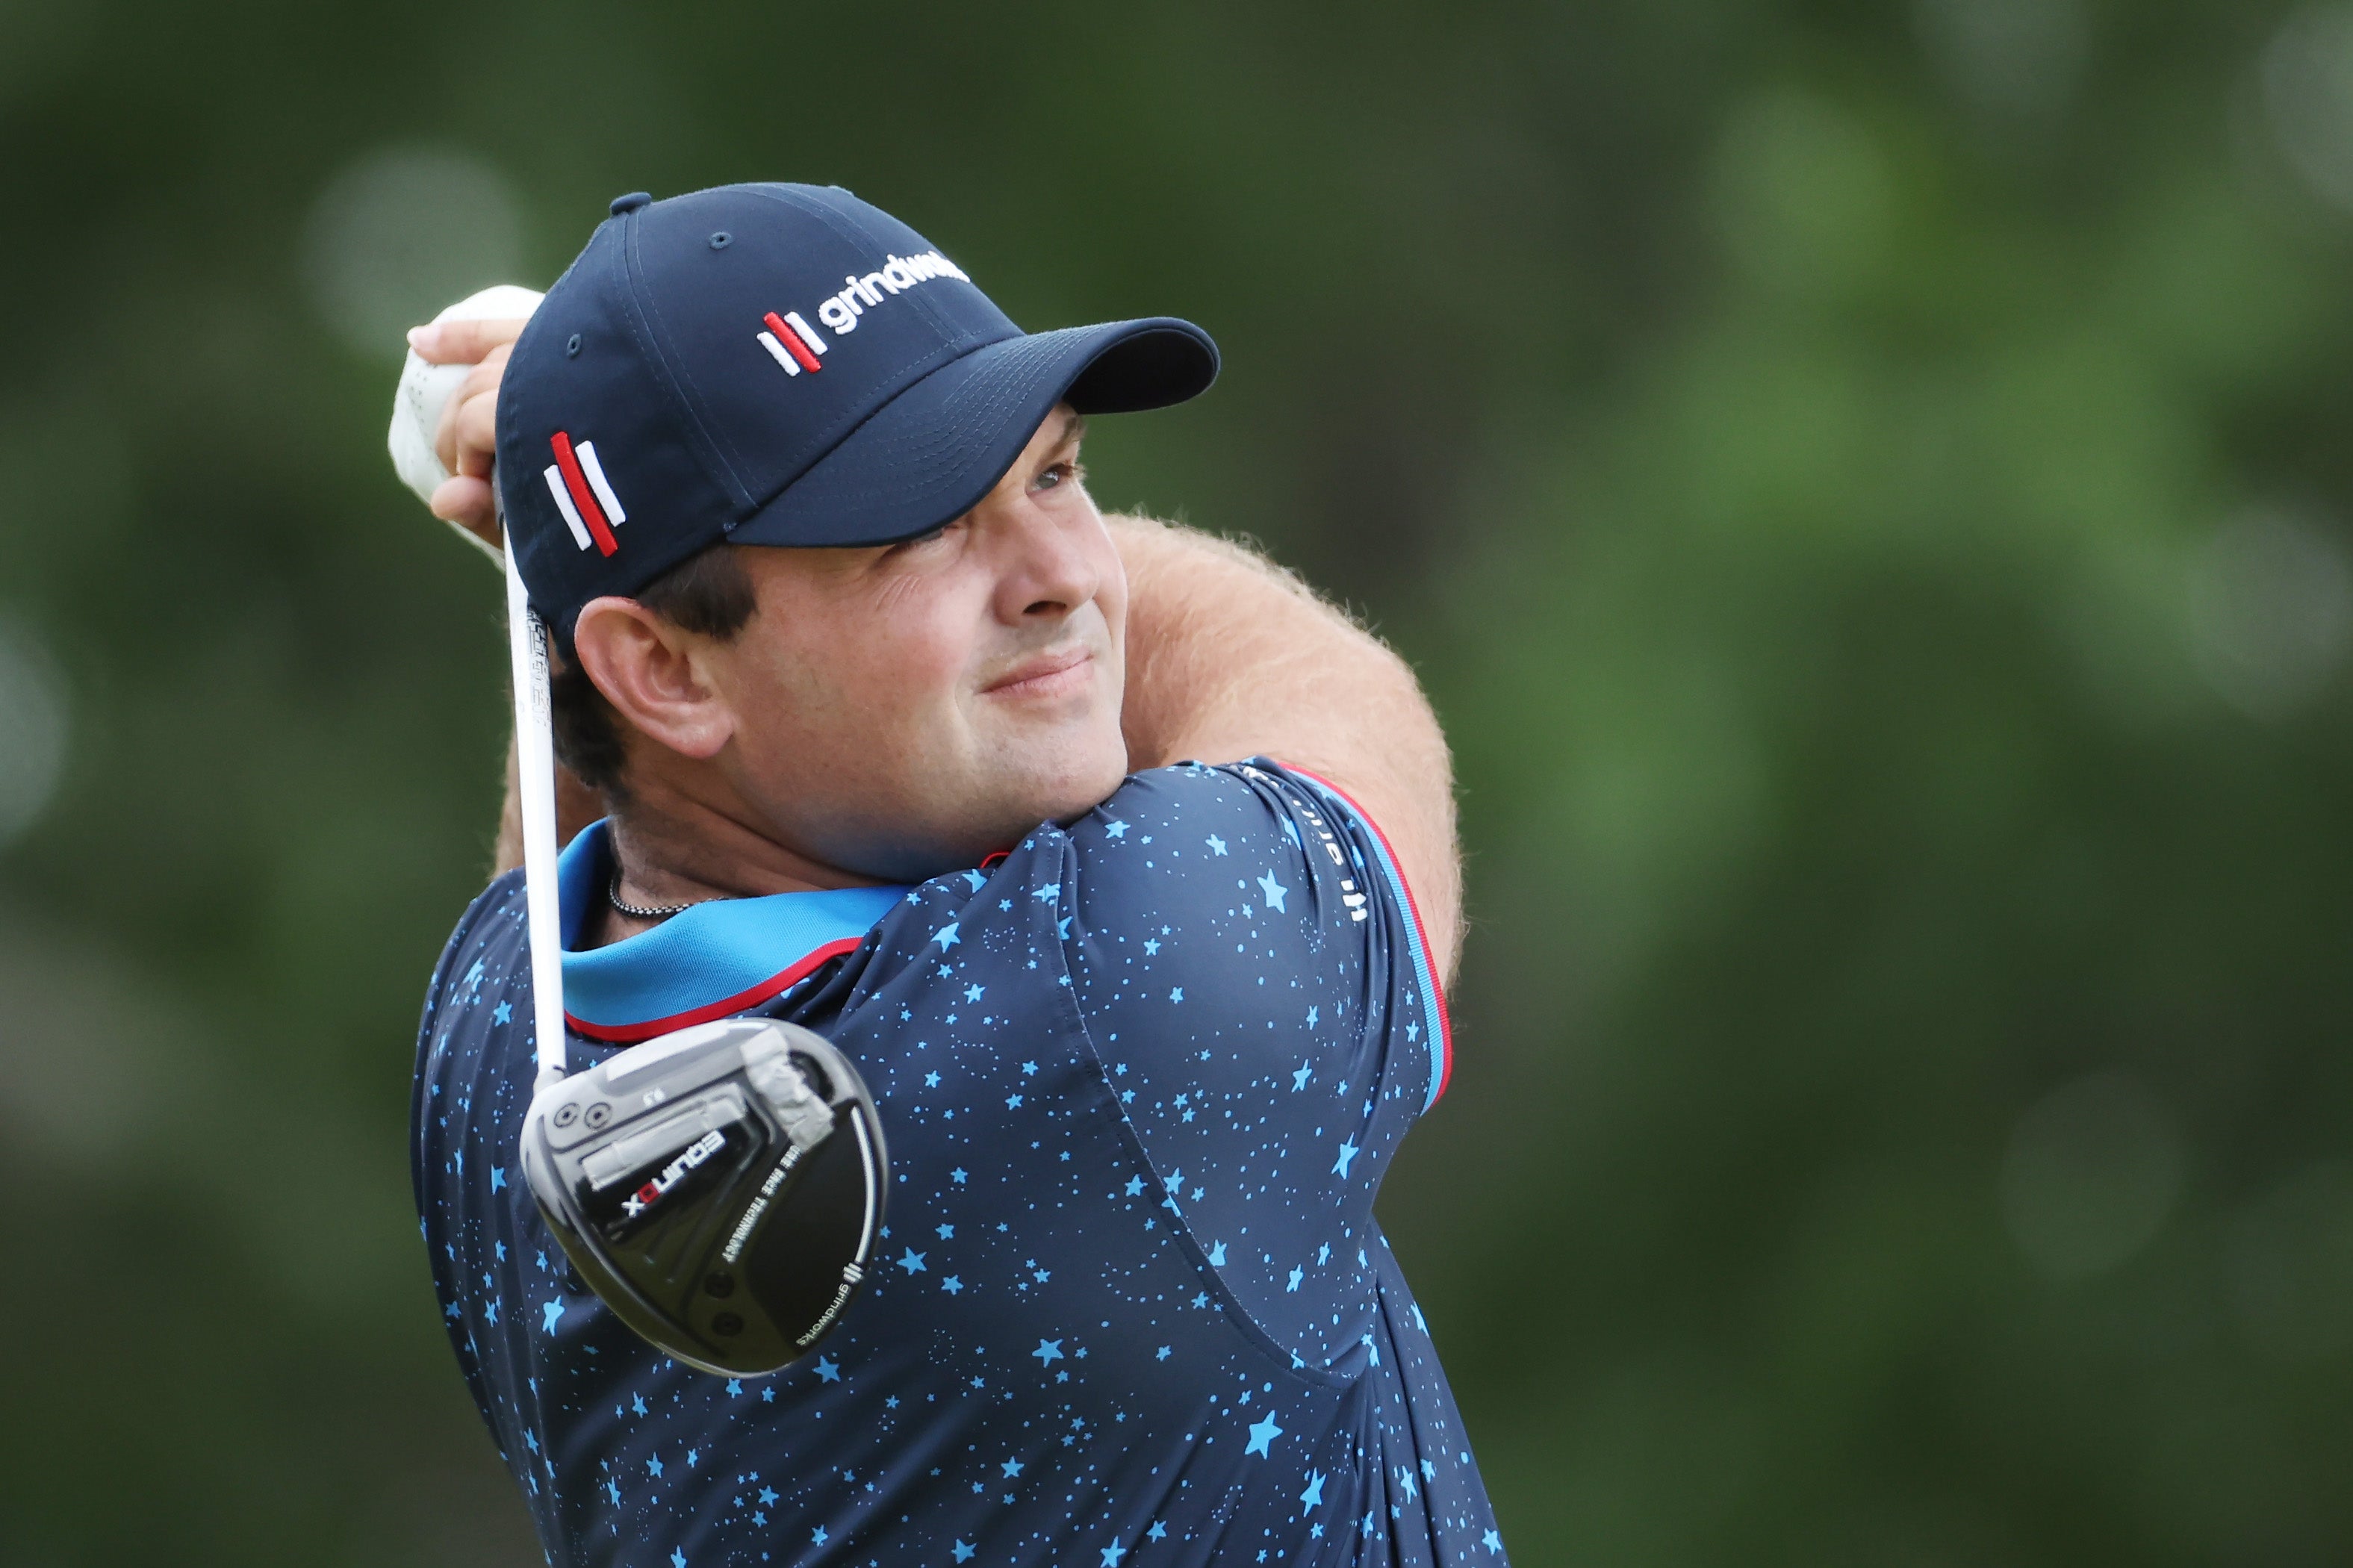 Reed will tee it up at the second event of the controversial series this week in Oregon